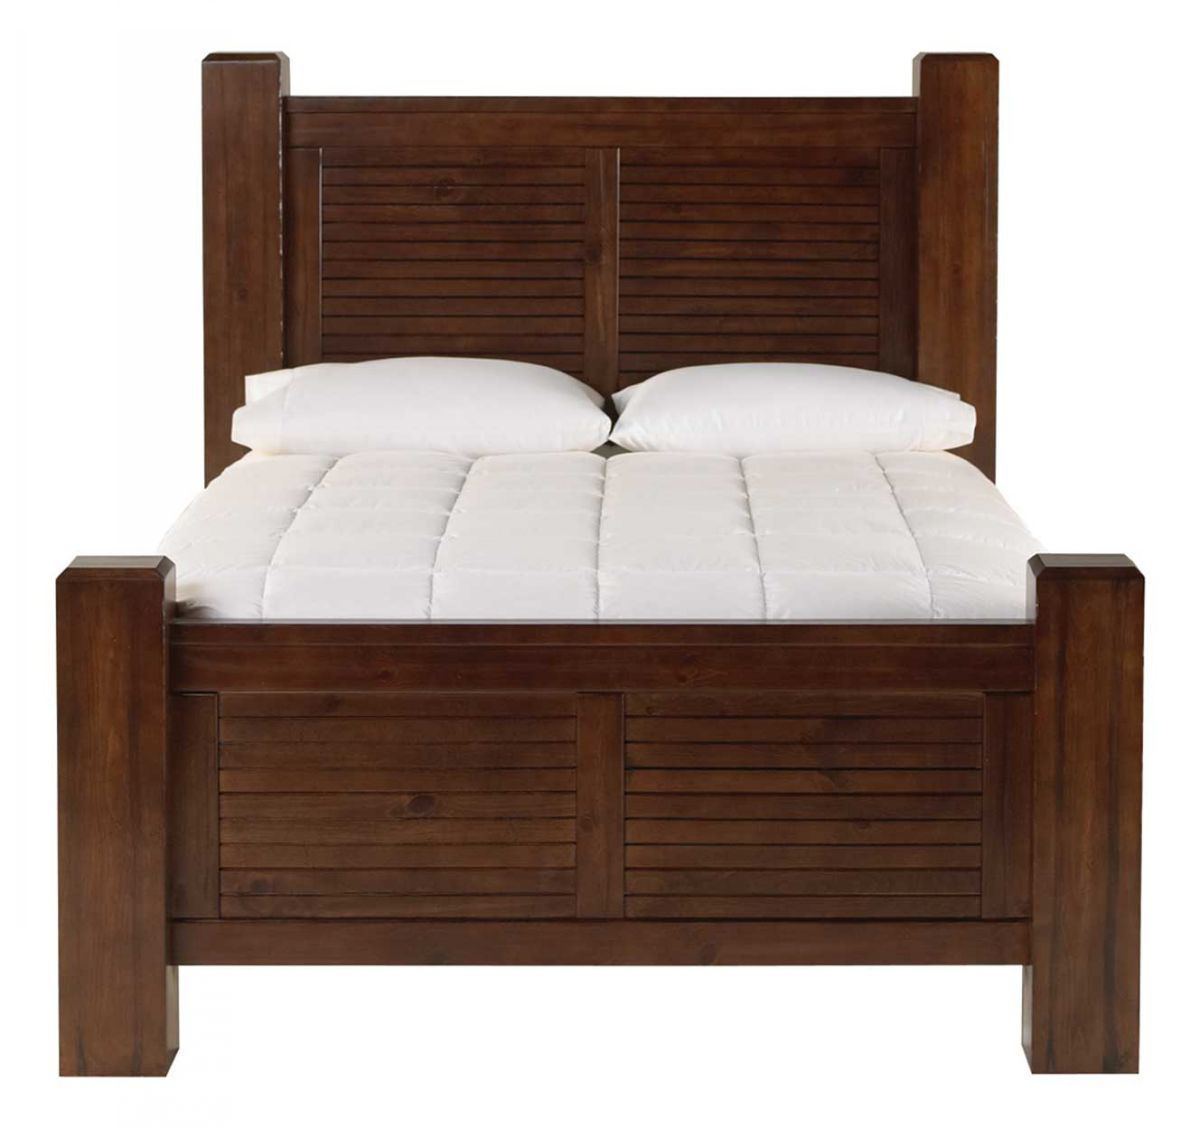 Latitude Queen Low Post Bed Bad, Solid Wood King Size Sleigh Bed Frame